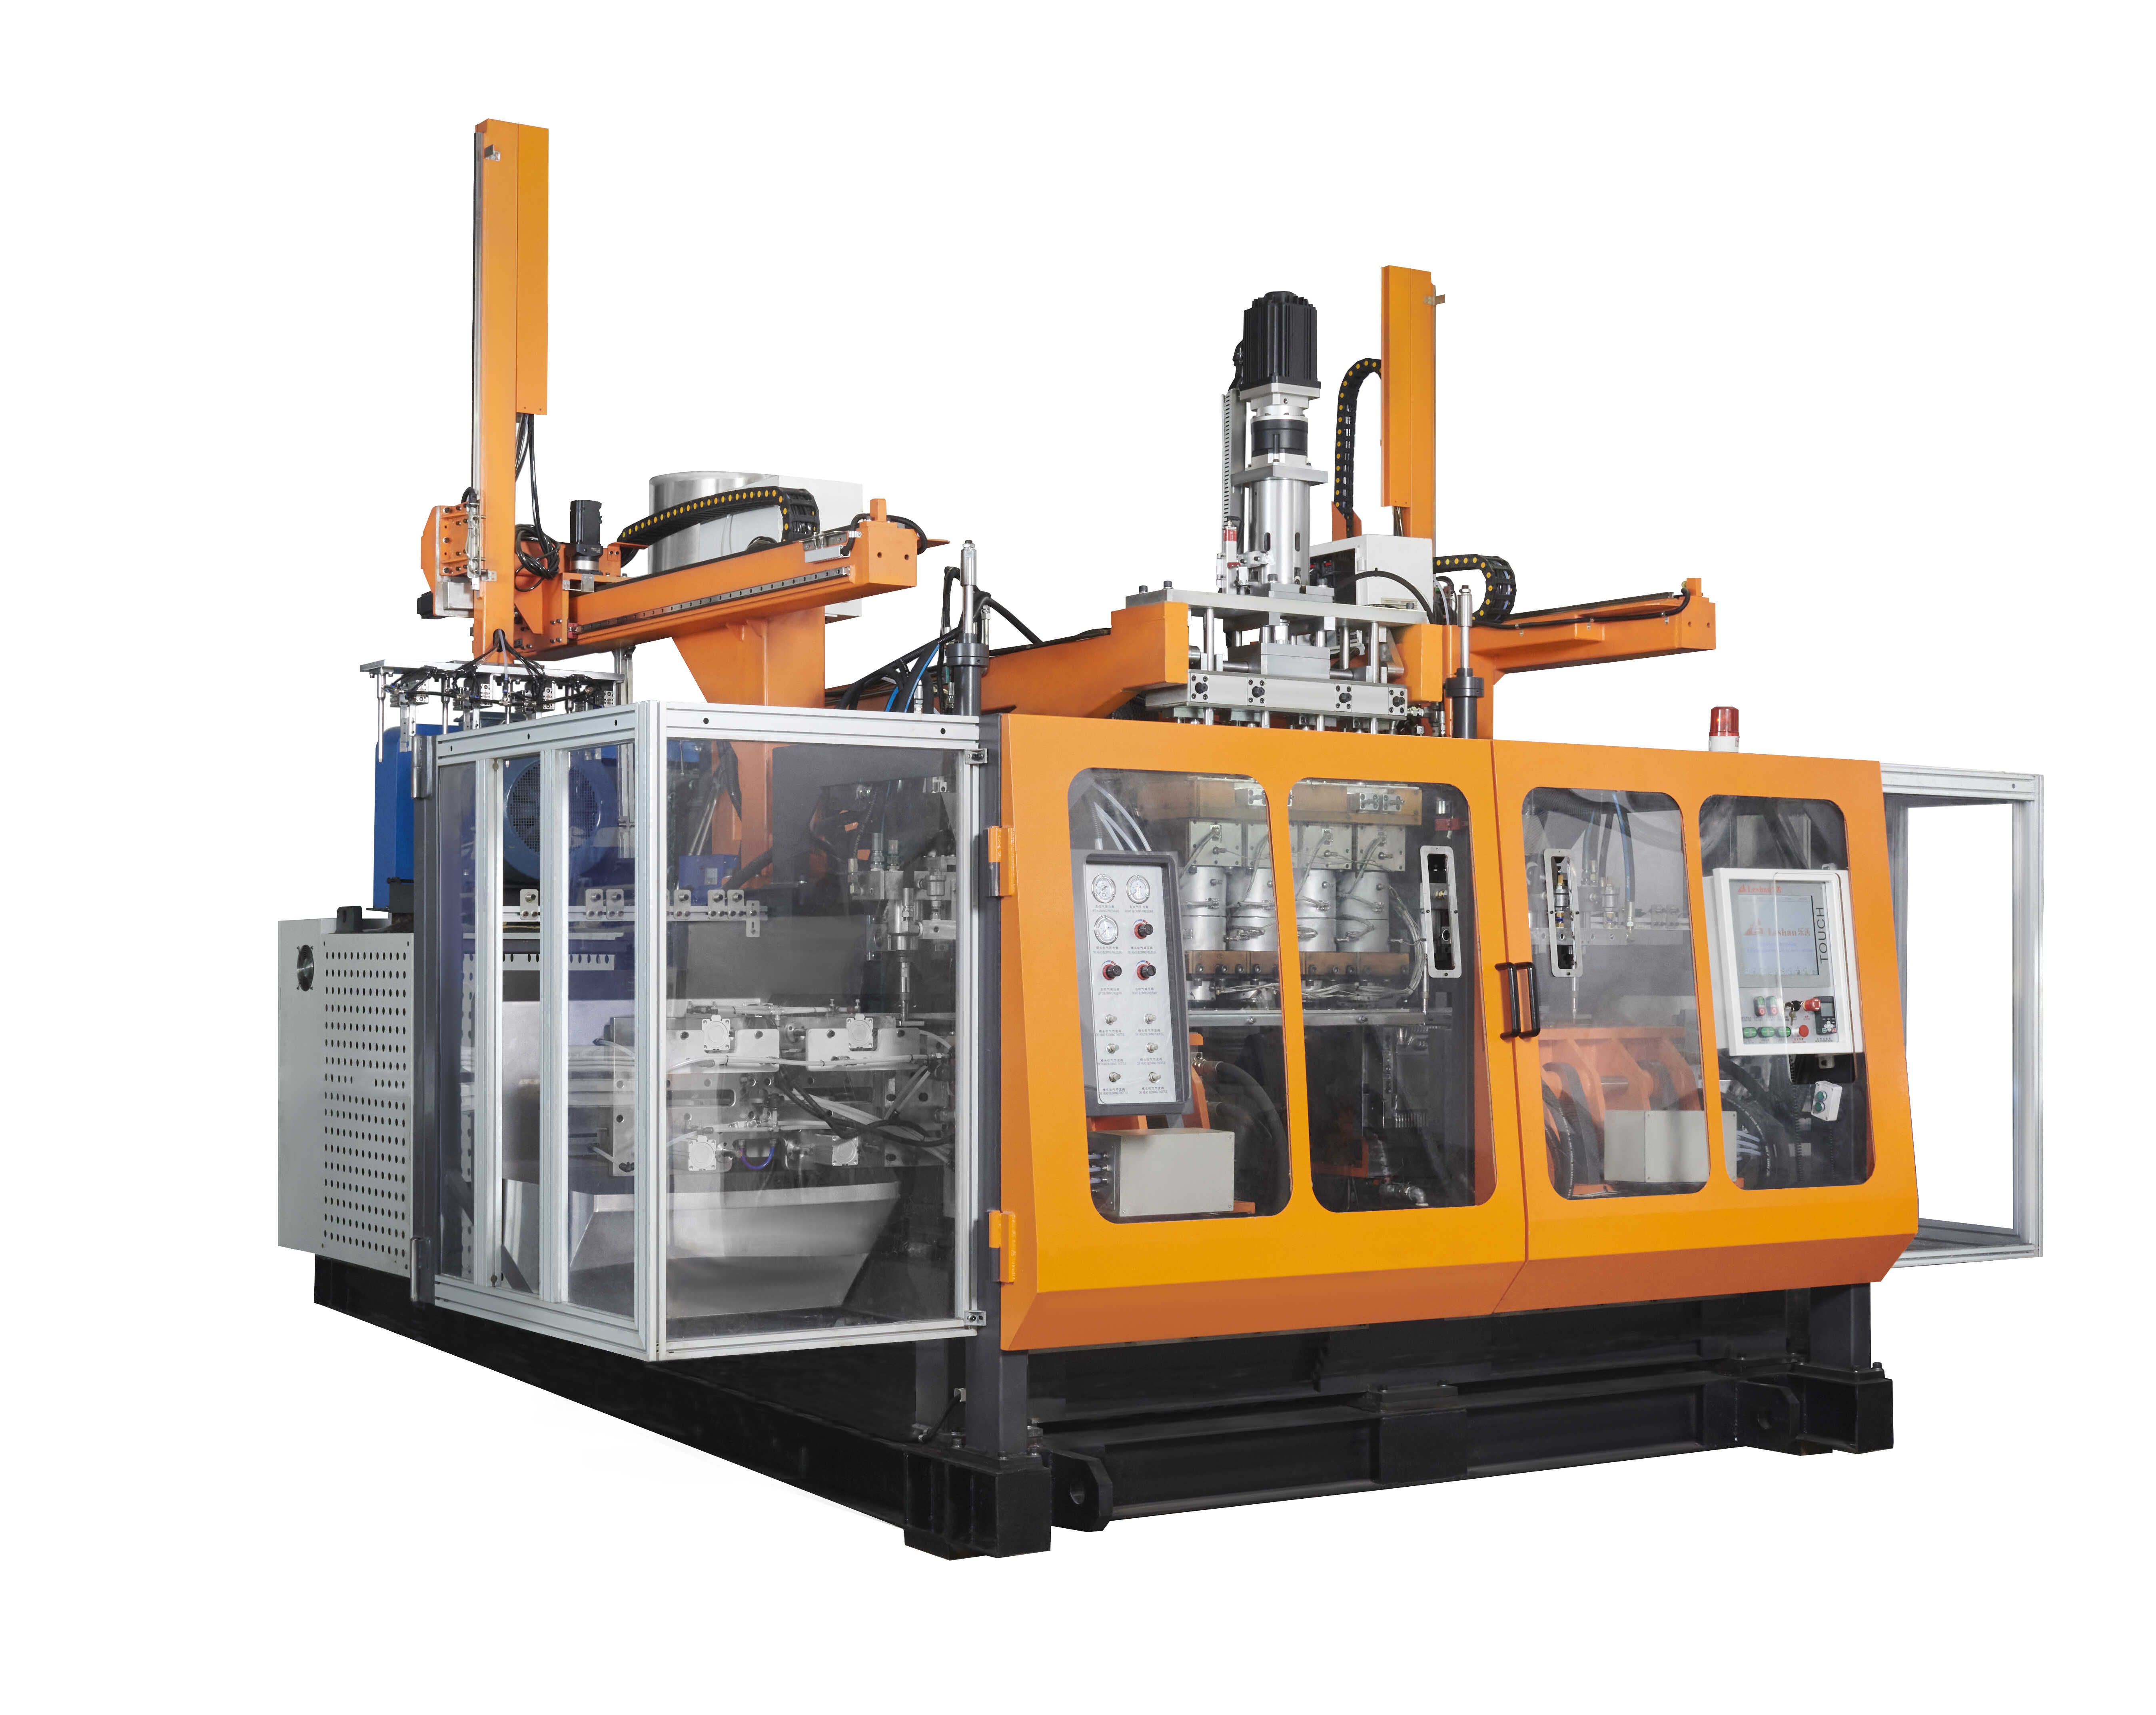 What are the common problems in the production process of china hdpe bottle blow molding machine?